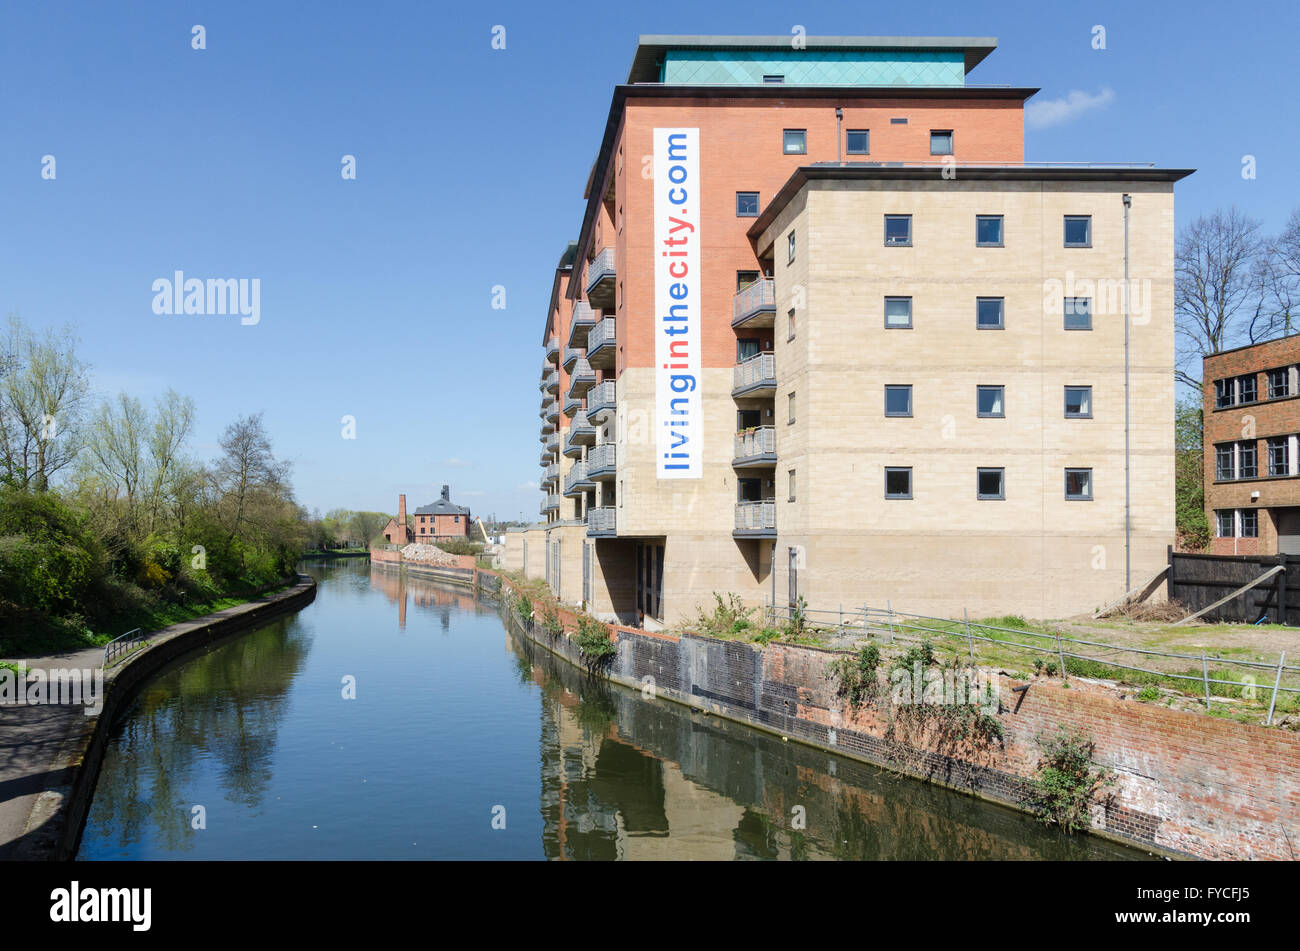 City centre apartments on the River Soar in Leicester Stock Photo